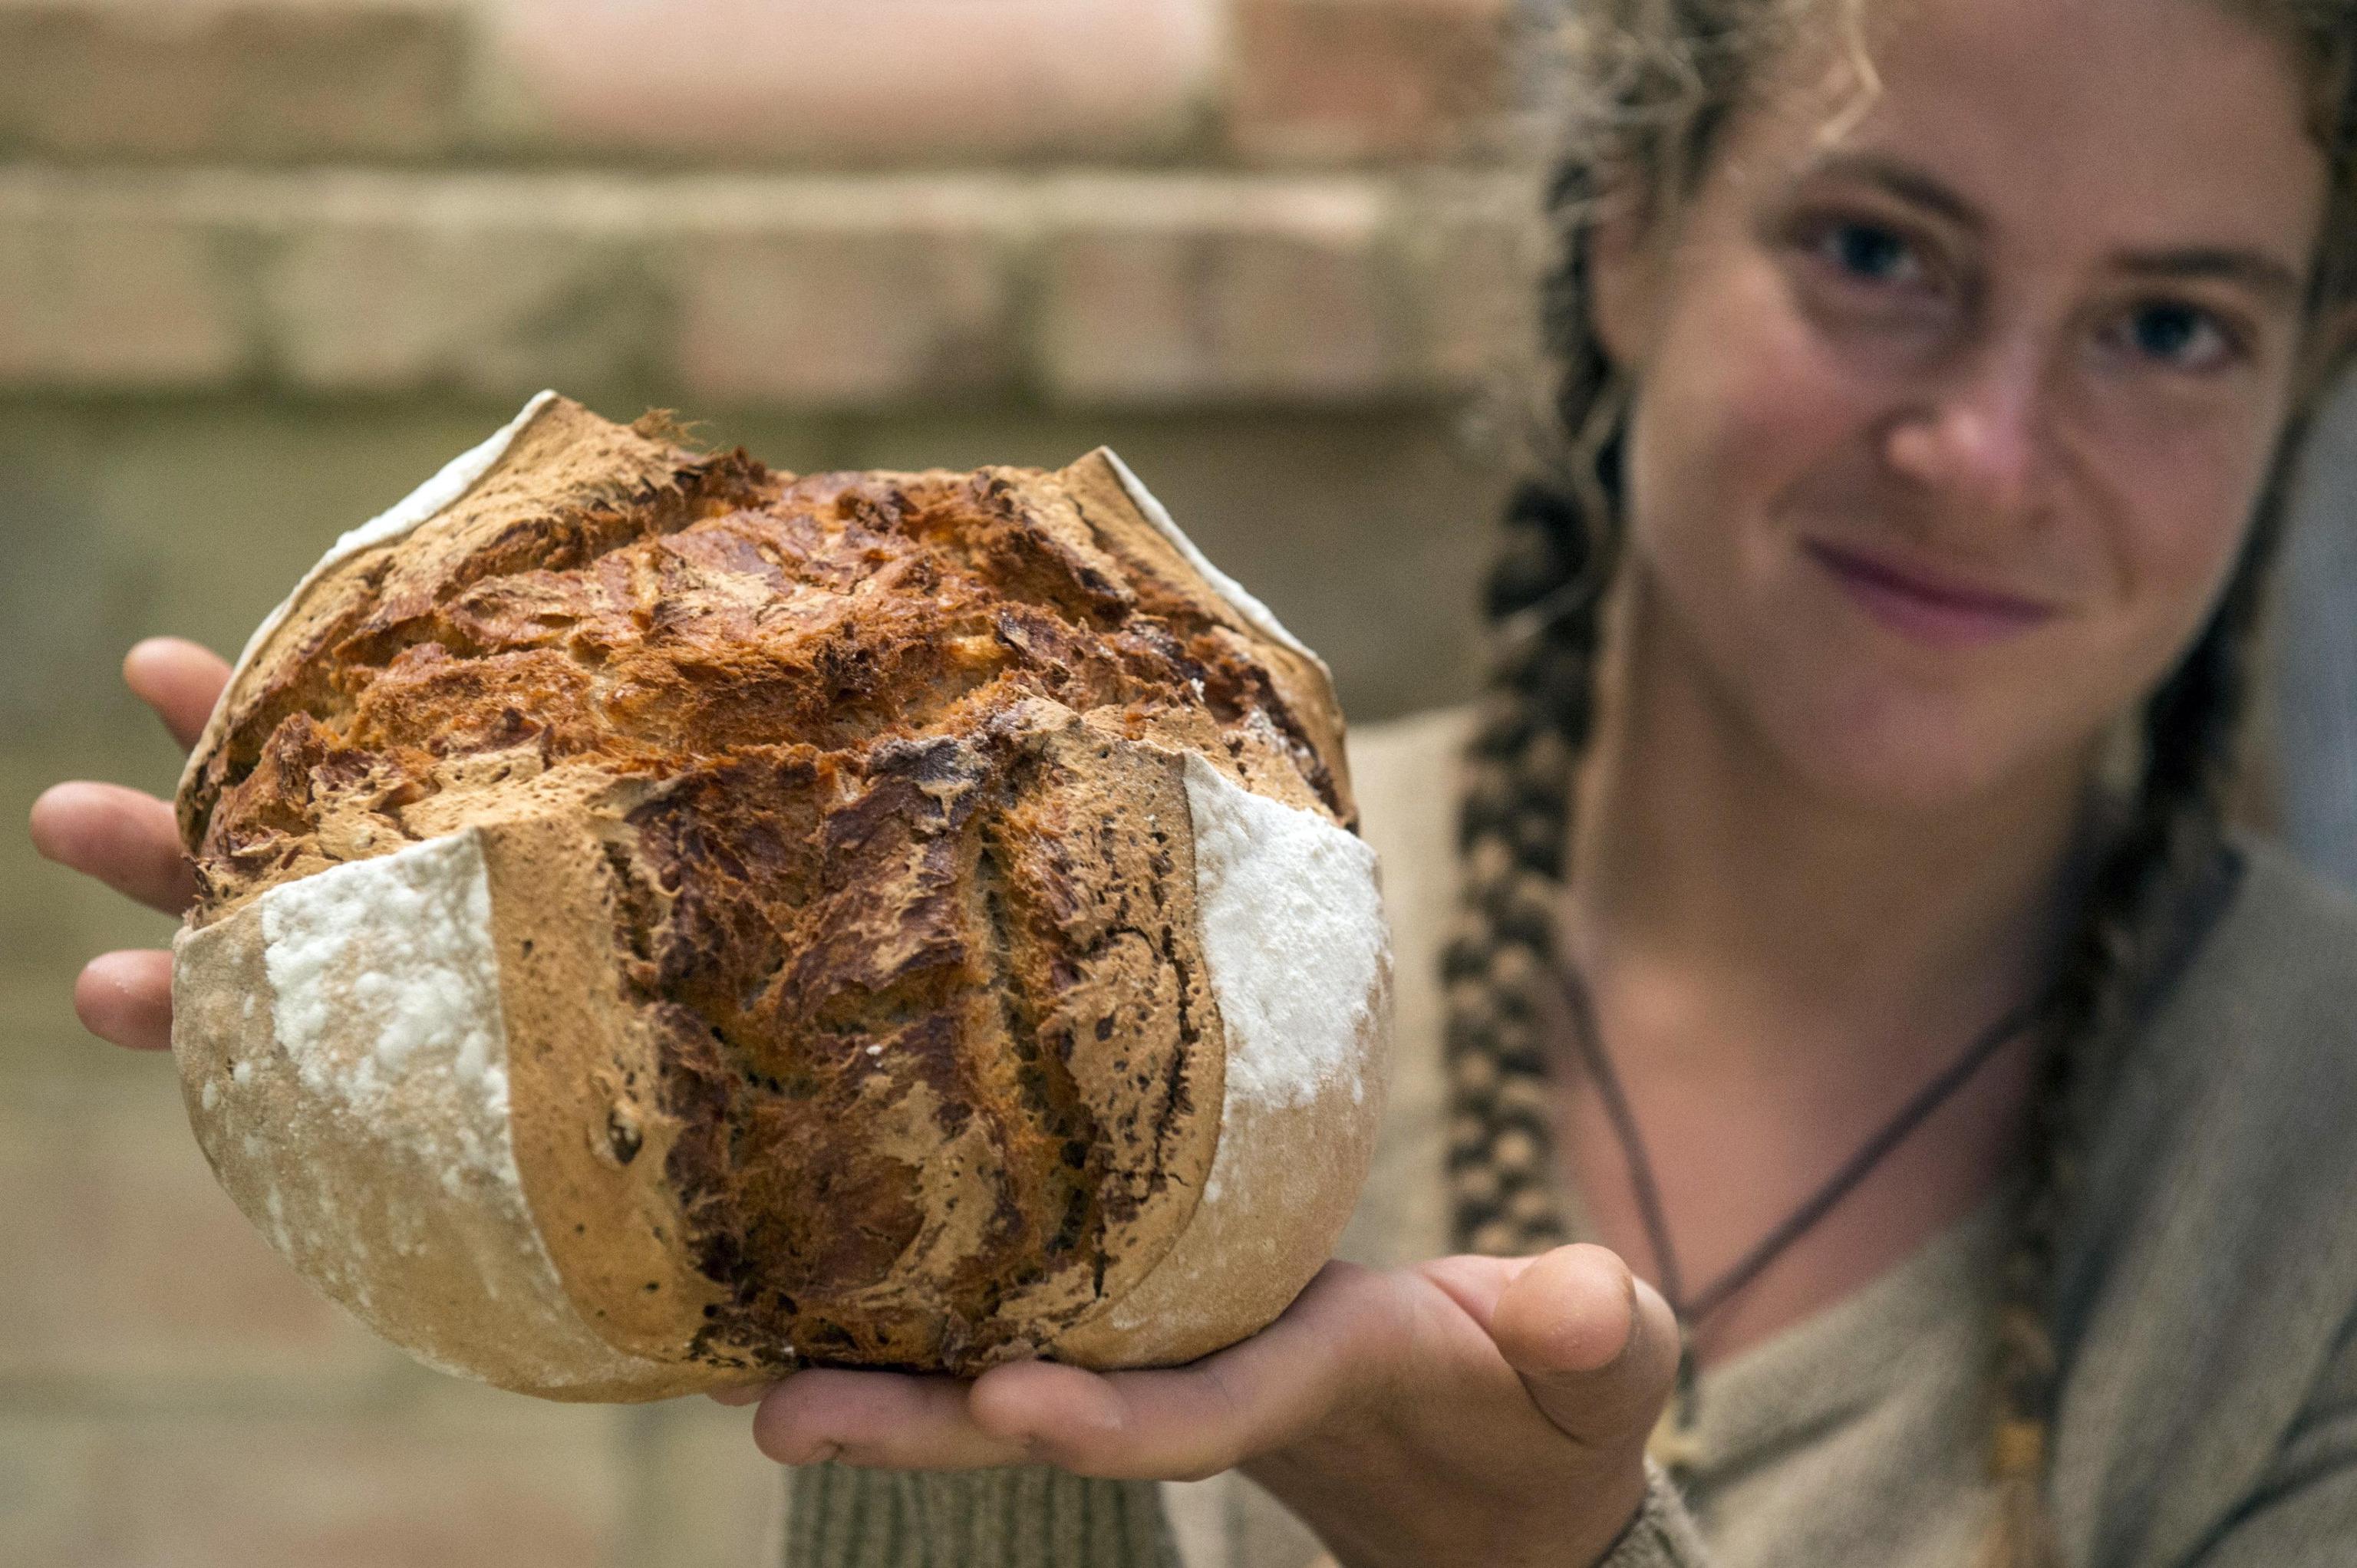 epa07924762 Hungarian organic gardener Dominika Zaka holds a freshly baked bread in her hands at their place of residence, in a yurt in Szentes, Hungary, 16 October 2019. The young woman and her partner bake leavened bread made of organic flours for themselves and their friends once a week. World Bread Day is celebrated on 16 October to commemorate the anniversary of the creation of the Food and Agriculture Organization of the United Nations (FAO).  EPA/Sandor Ujvari HUNGARY OUT ATTENTION: This Image is part of a PHOTO SET